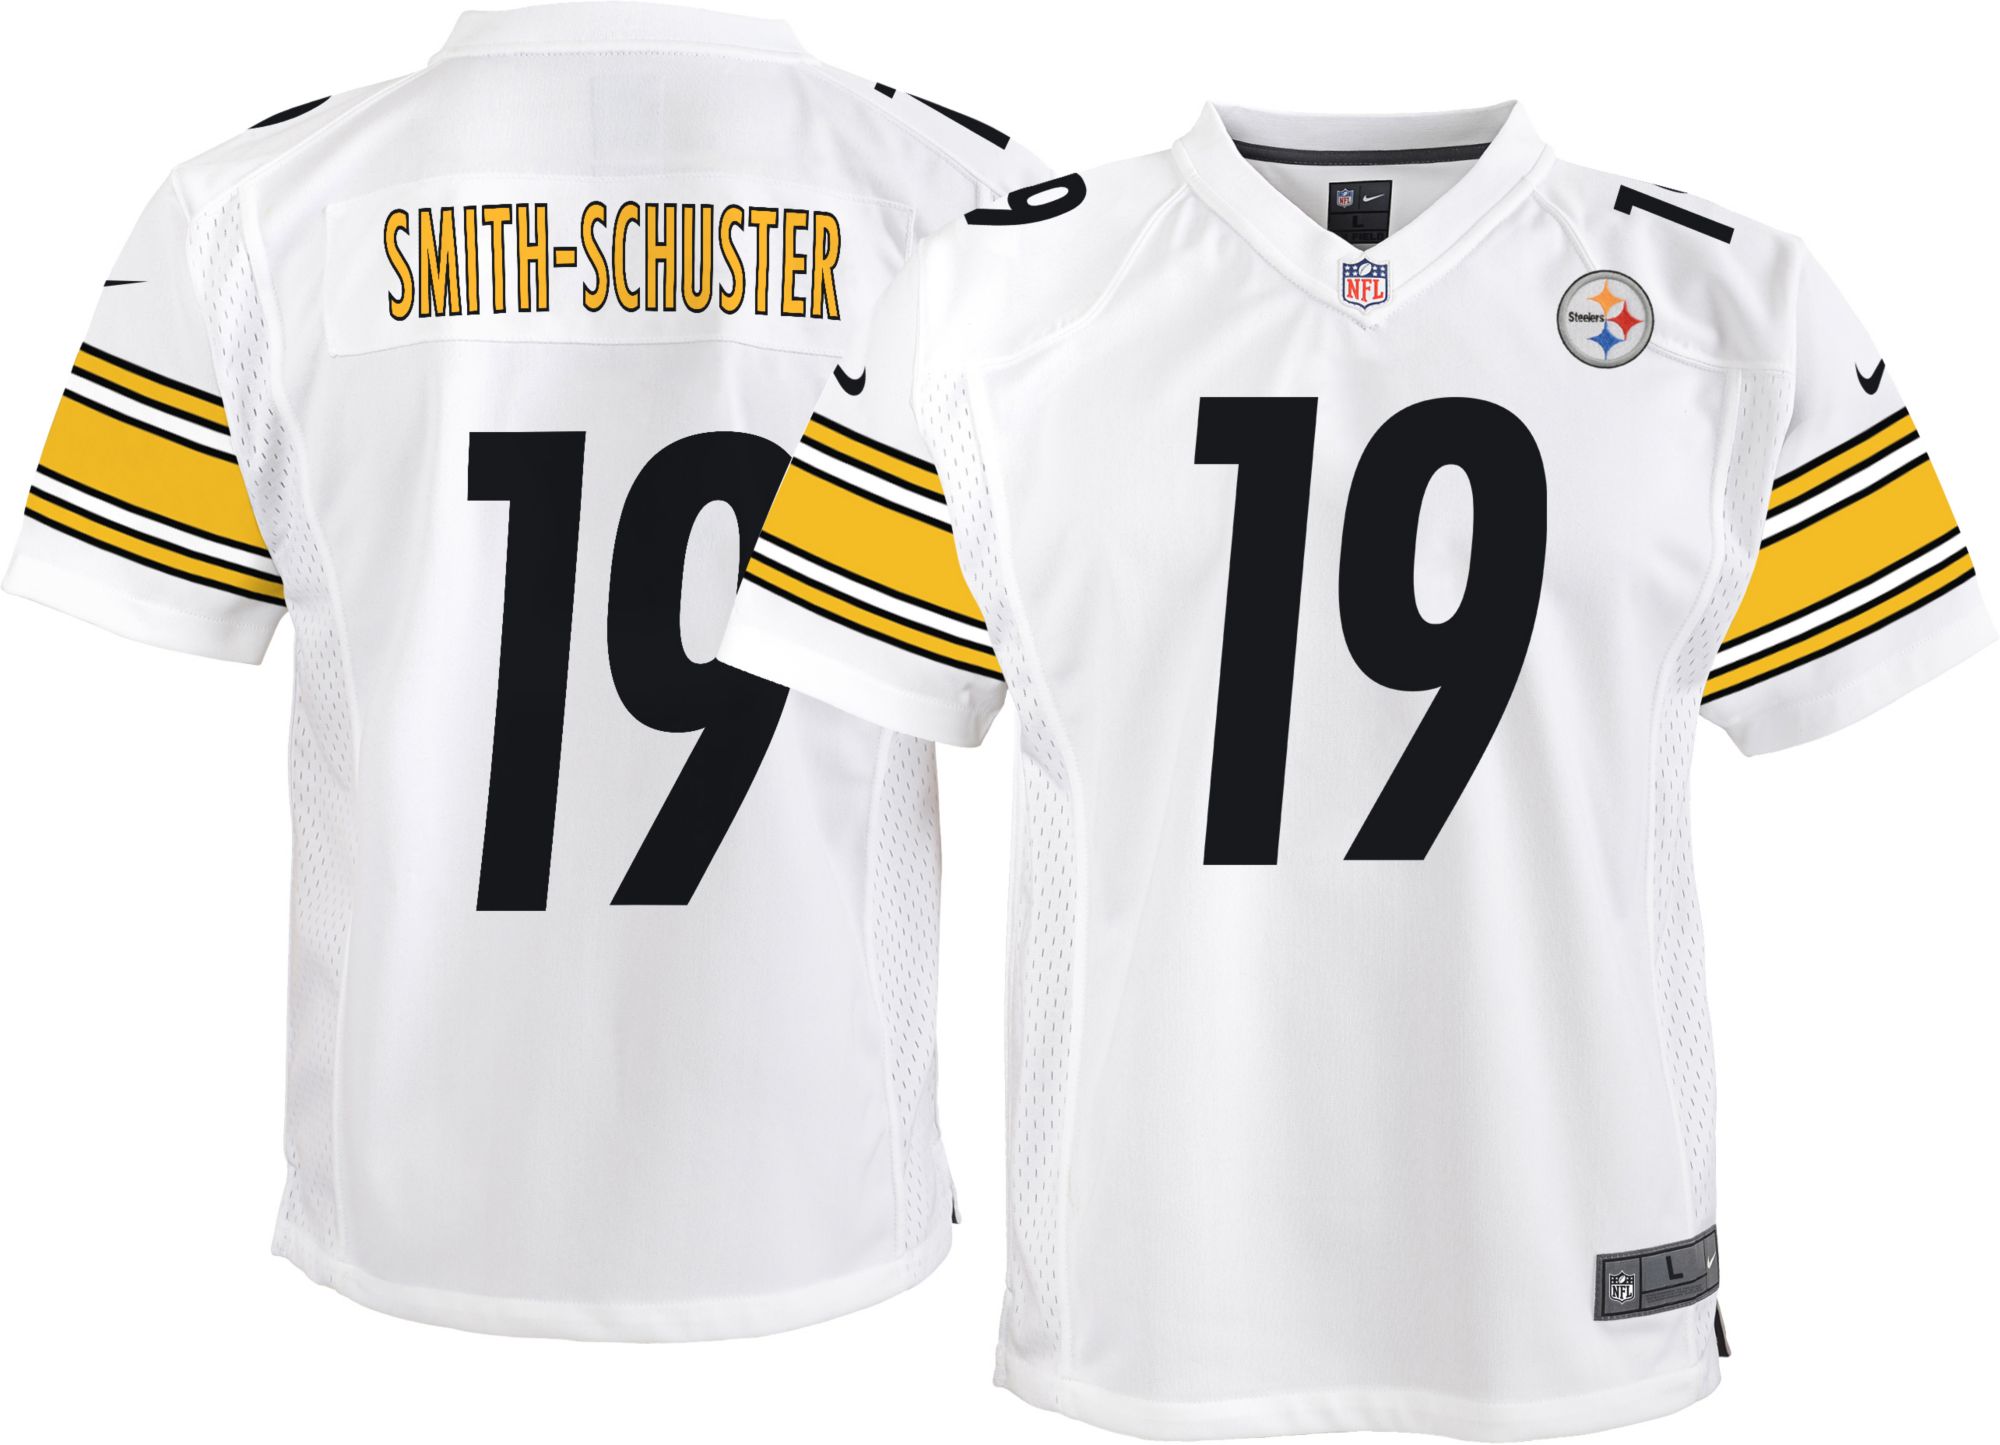 steelers smith schuster jersey